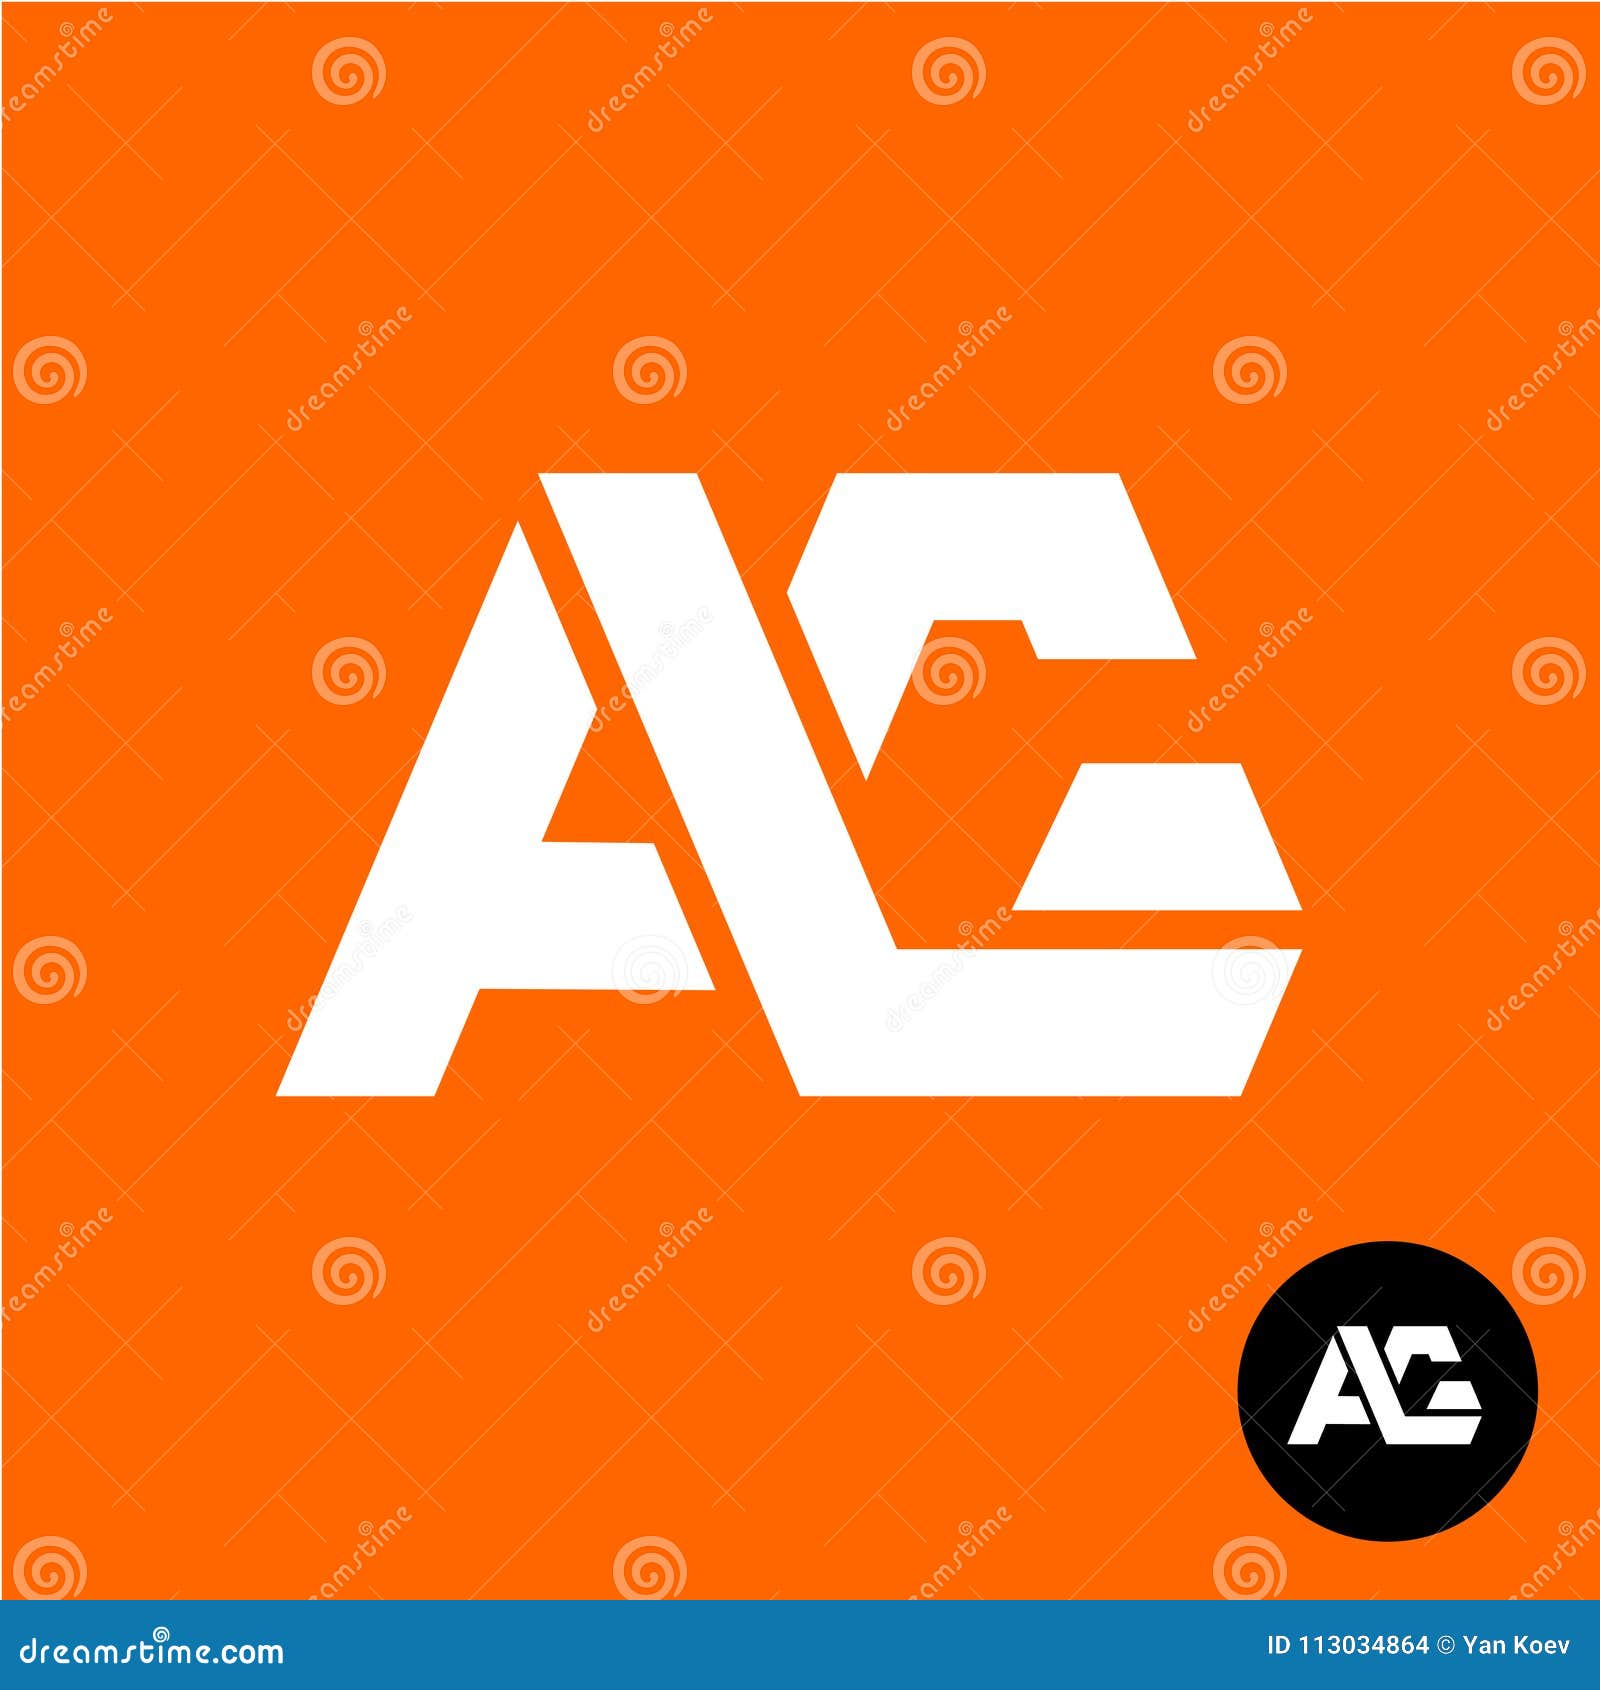 letters a and g ligature logo. two letters ag sign